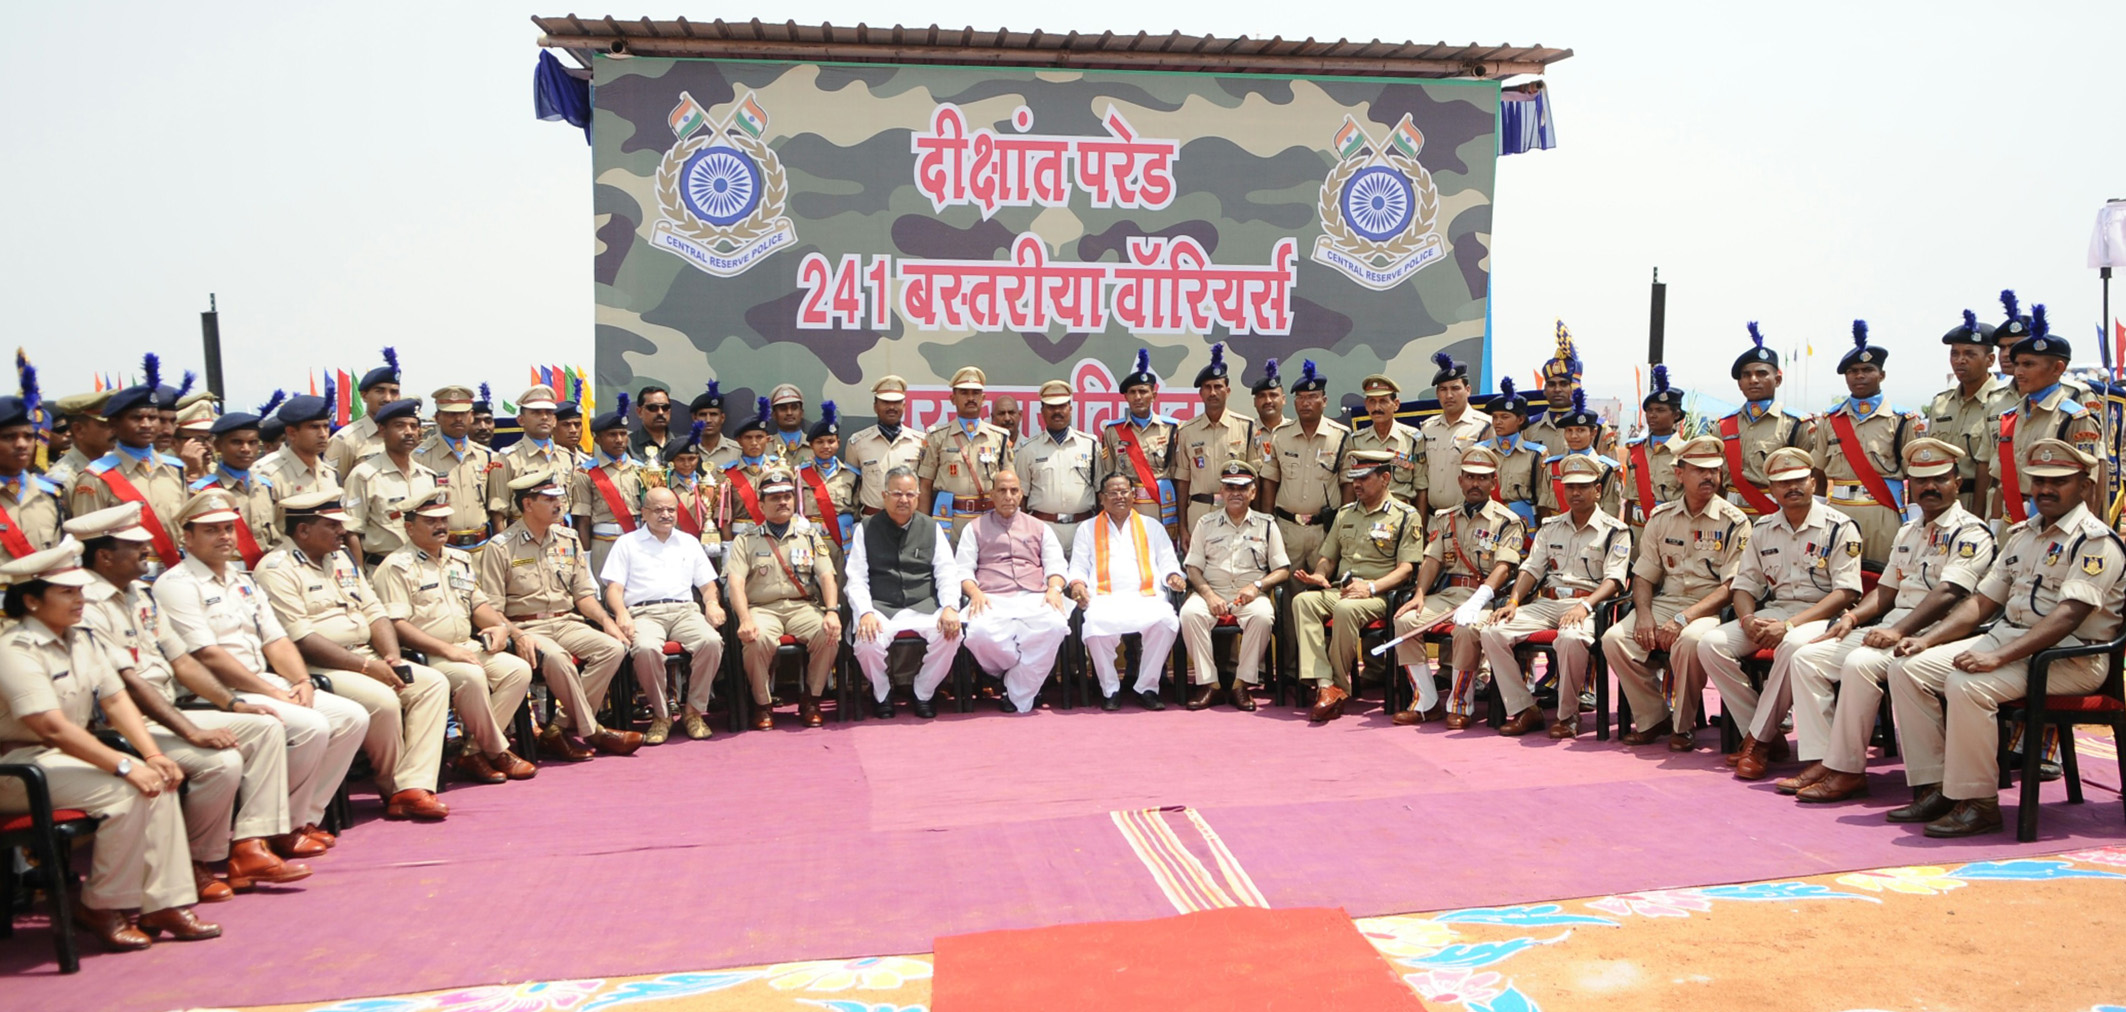 The Union Home Minister, Shri Rajnath Singh in a group photograph, during the Passing Out Parade of the Bastariya Battalion of CRPF, in Ambikapur, in Chhattisgarh on May 21, 2018.